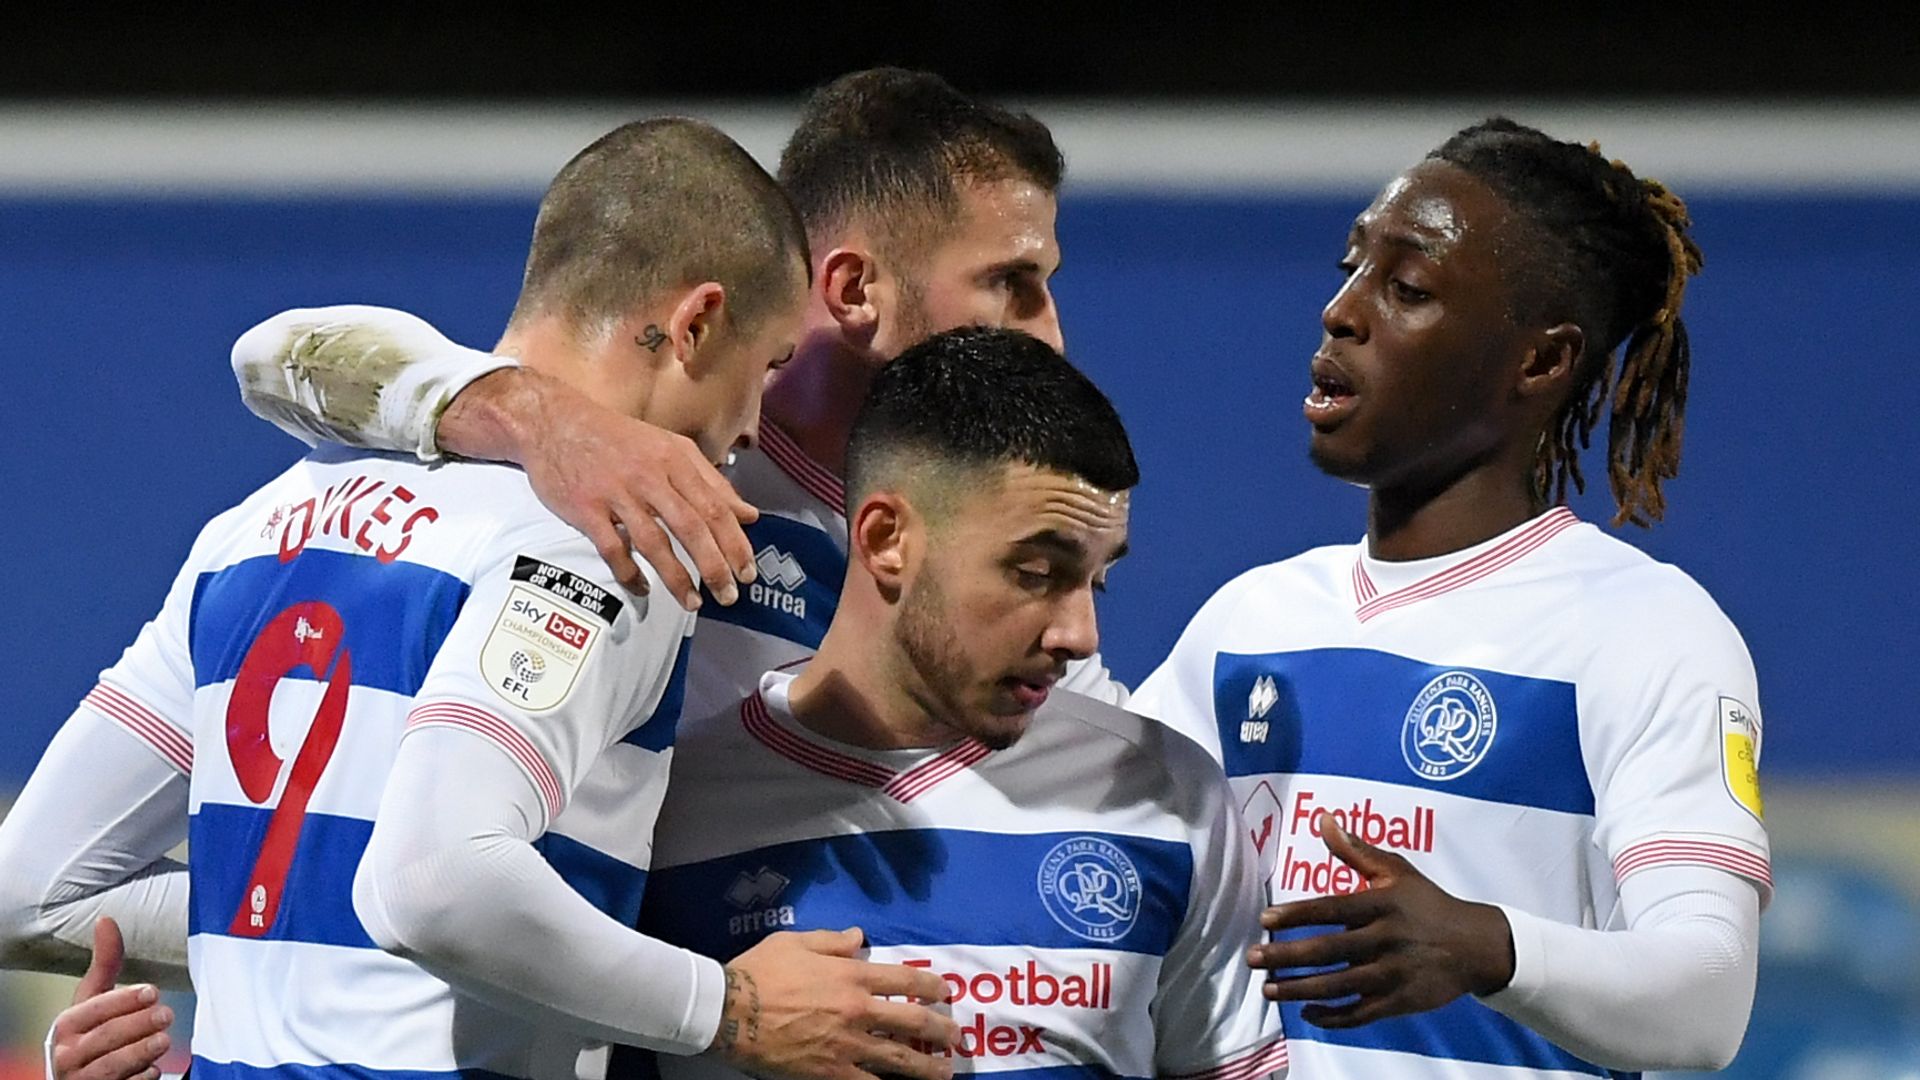 QPR see off Rotherham in five-goal thriller